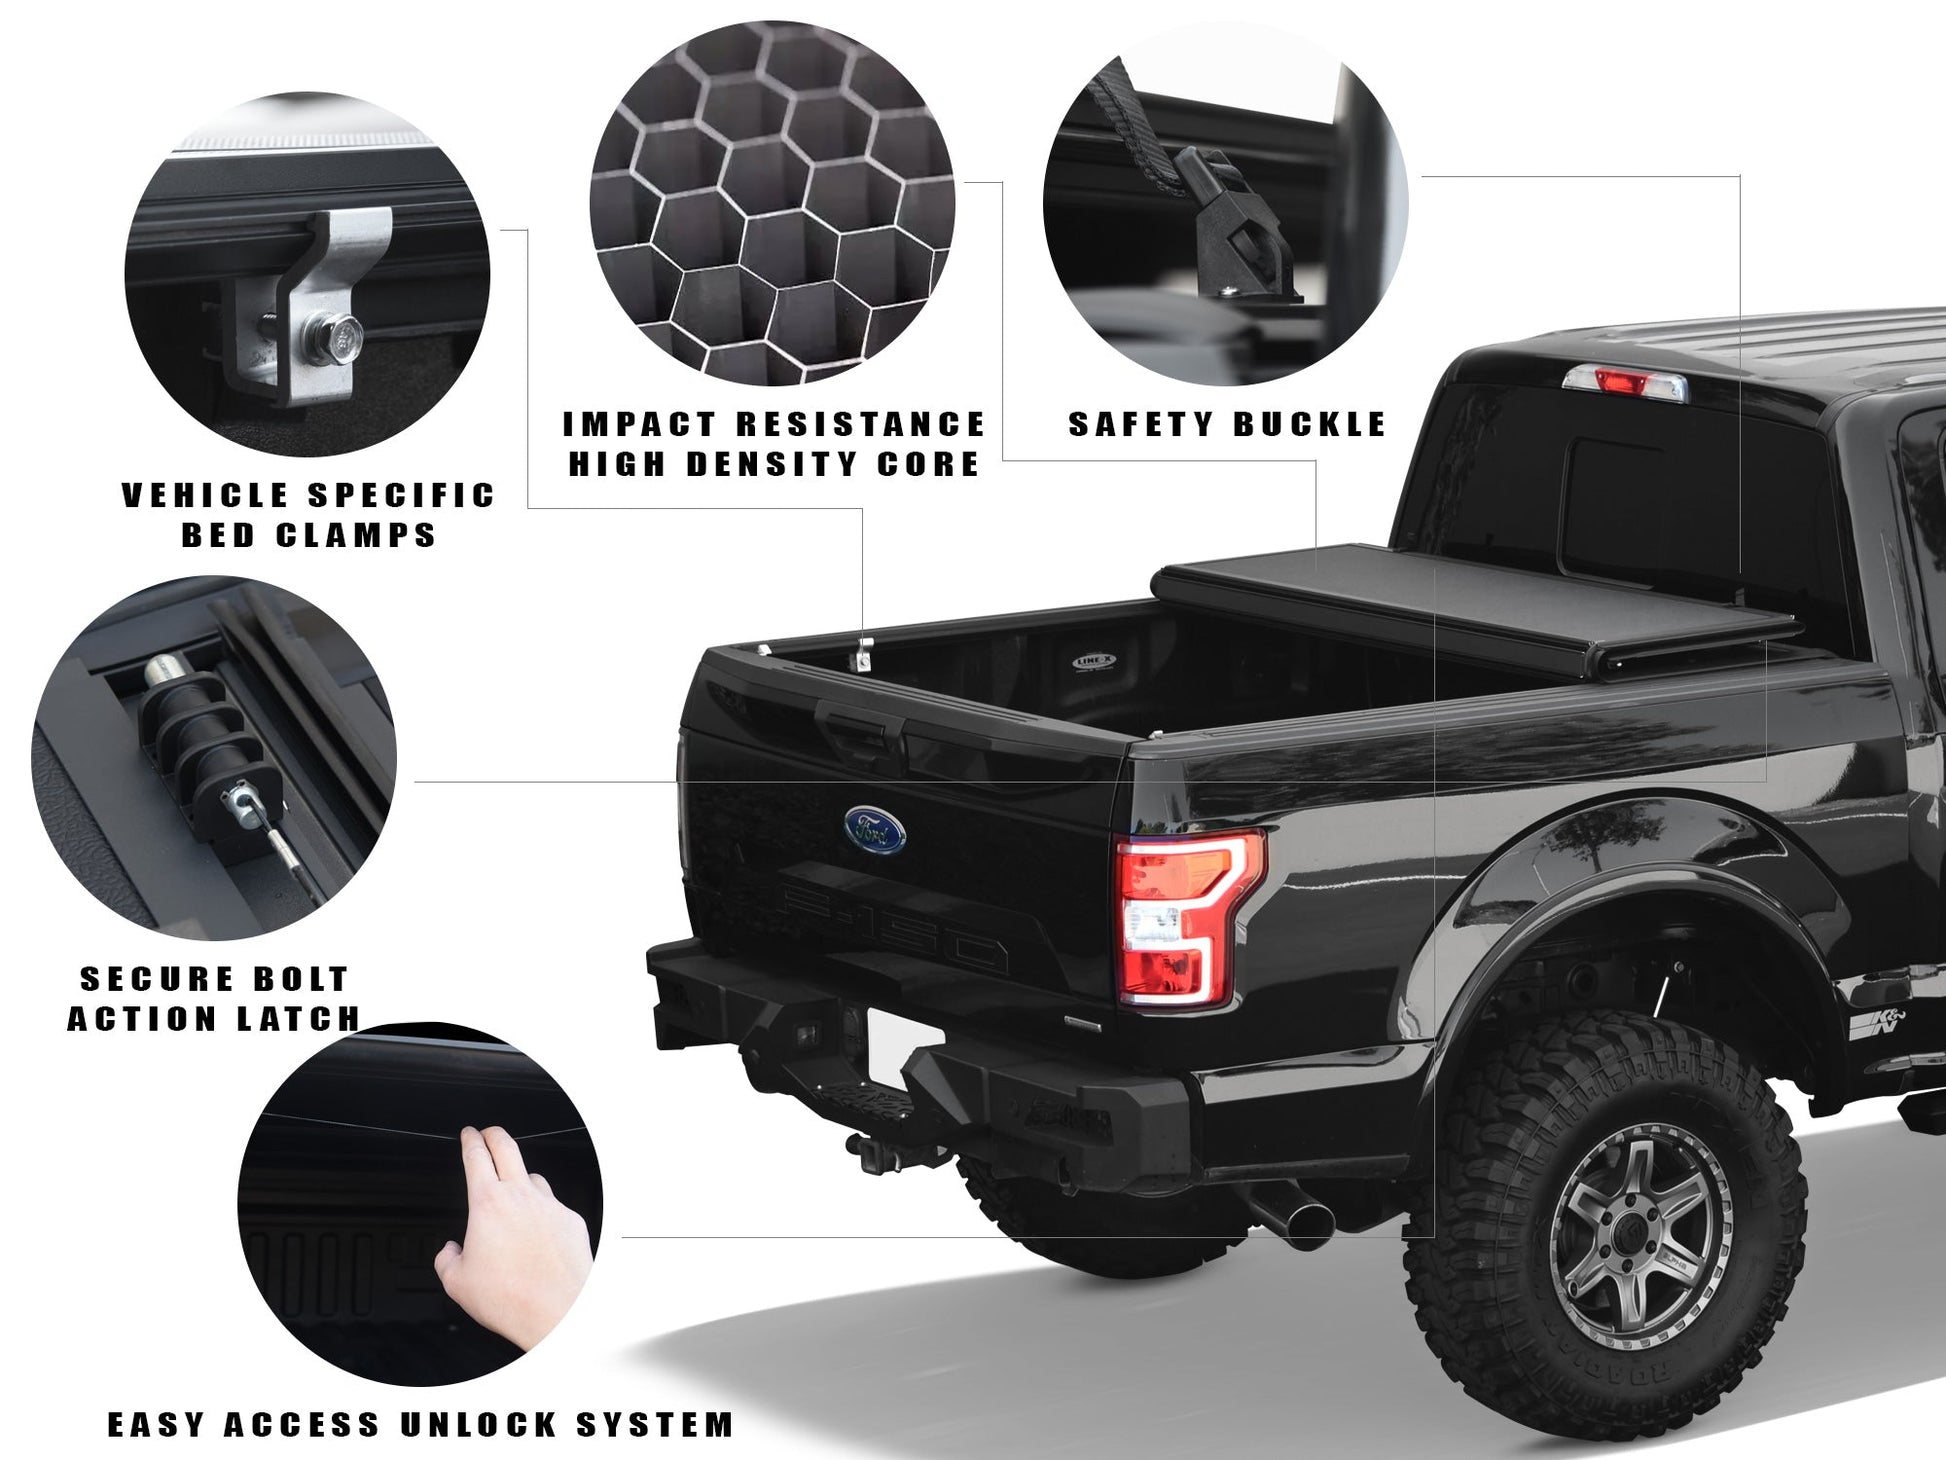 Armordillo 2000-2003 Toyota Tundra CoveRex TFX Series Folding Truck Bed Tonneau Cover (6.2 Ft Bed) - Bayson R Motorsports